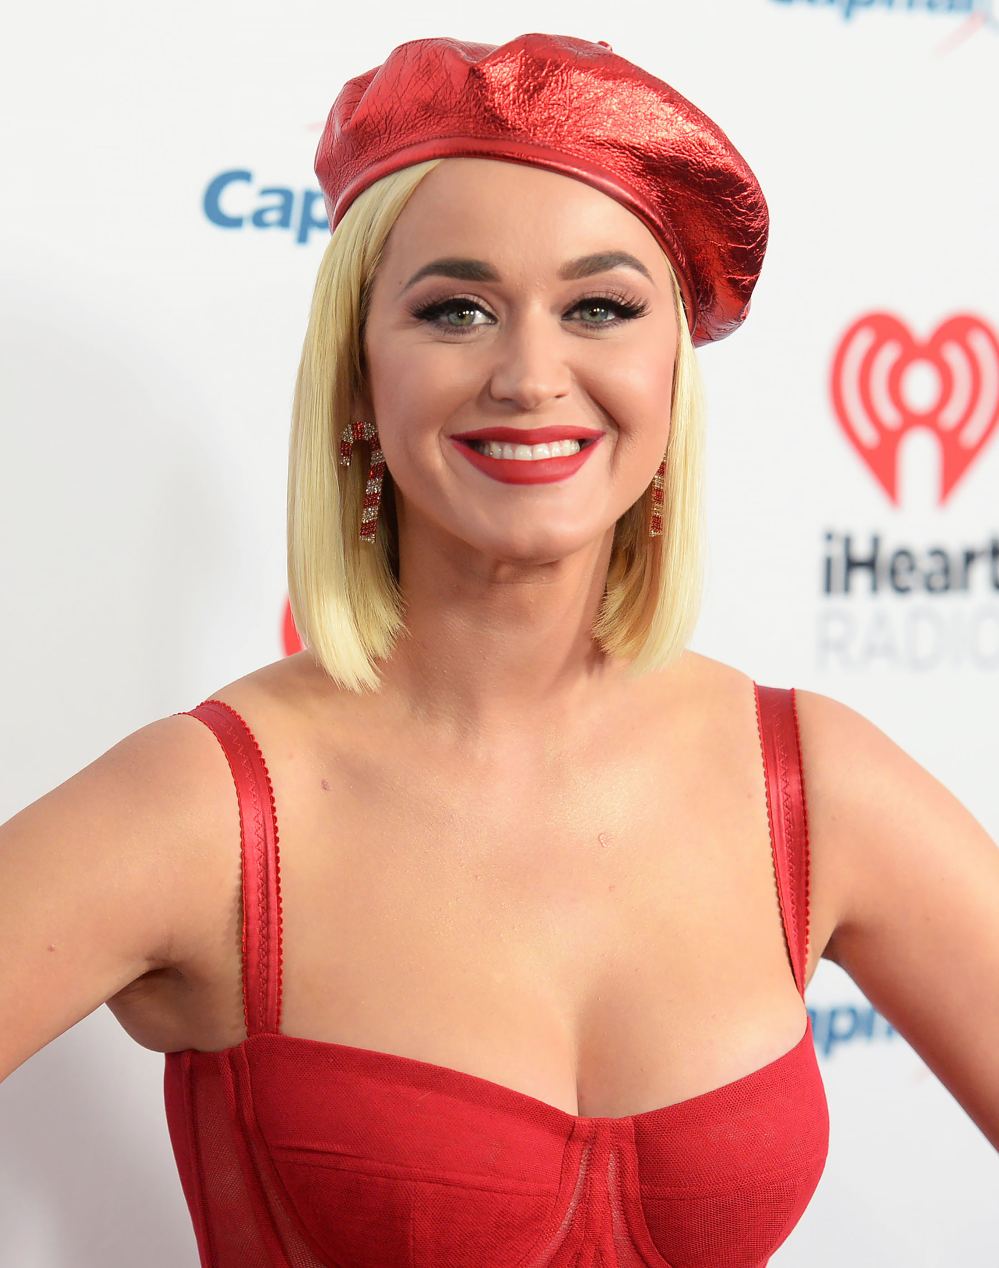 Katy Perry Says Motherhood Is a ‘Full-TIme Job’ After Welcoming Daughter Daisy